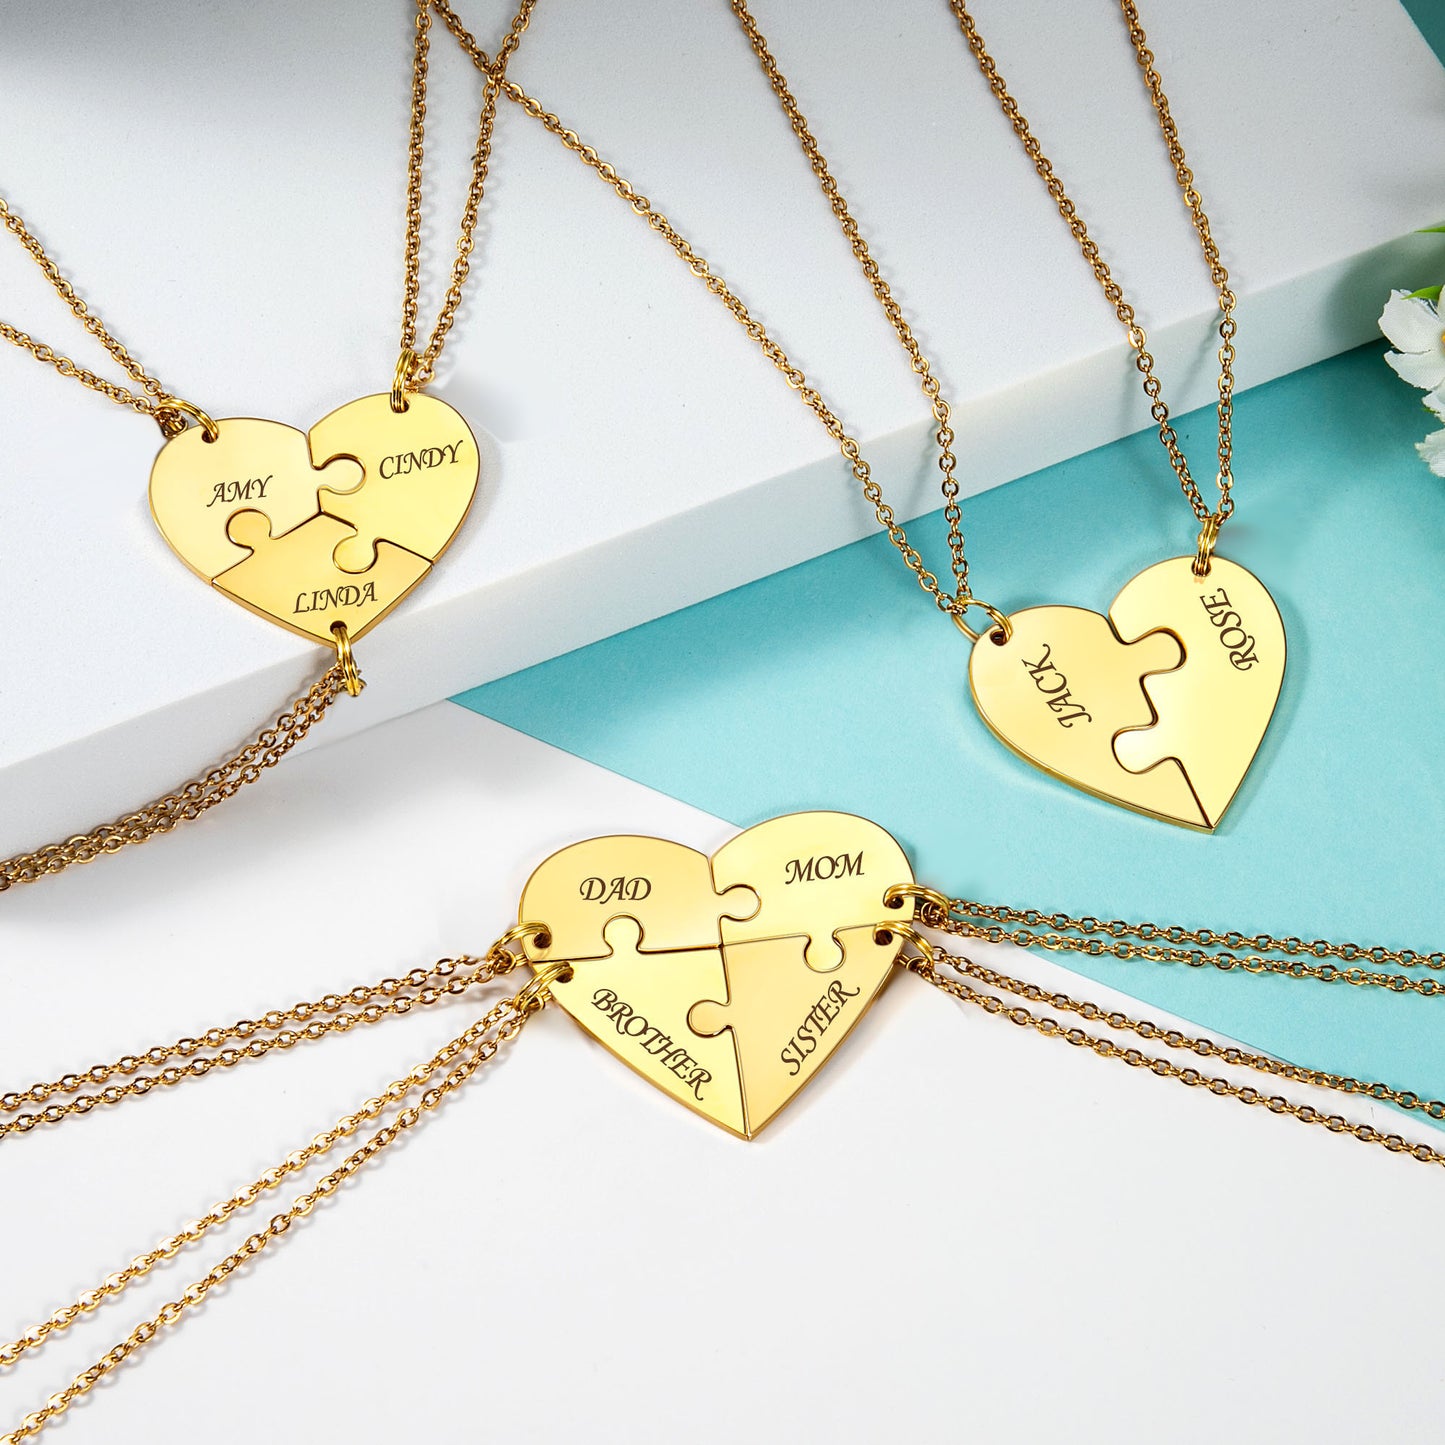 Personalized Puzzle Pieces Heart Shape Necklace/Kaychain for Love Best Friends Family Custom Name/Date Matching Pendant Set with Gift Box